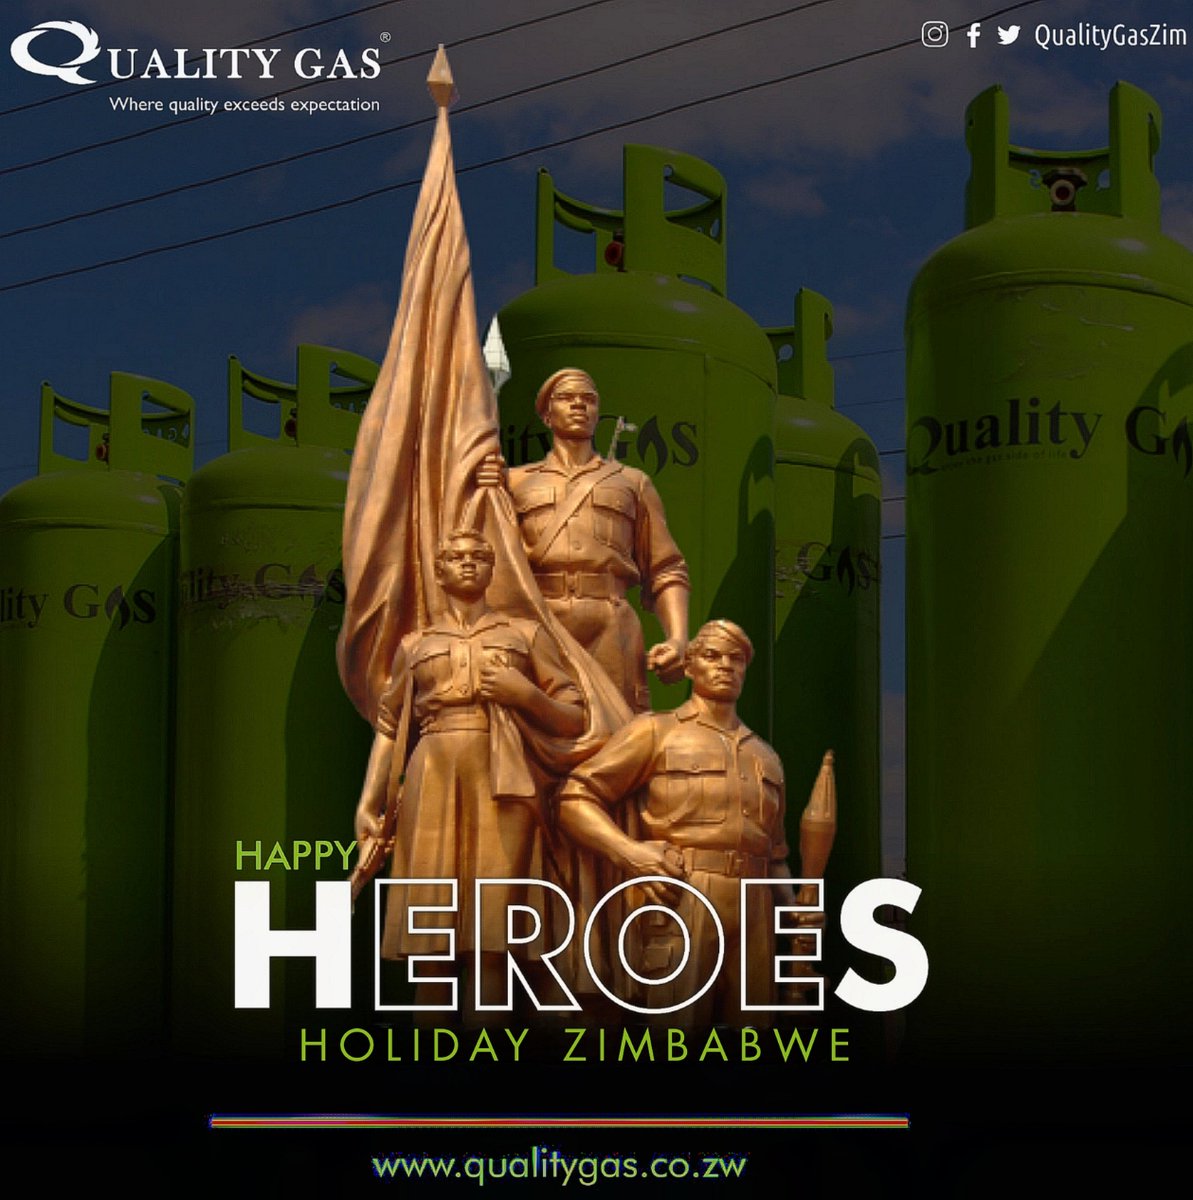 Lest we forget, those who served for our great nation...THANK YOU!

#qualitygas
#HeroesDay2022 
#heroes 
#gassupply 
#gasrefill